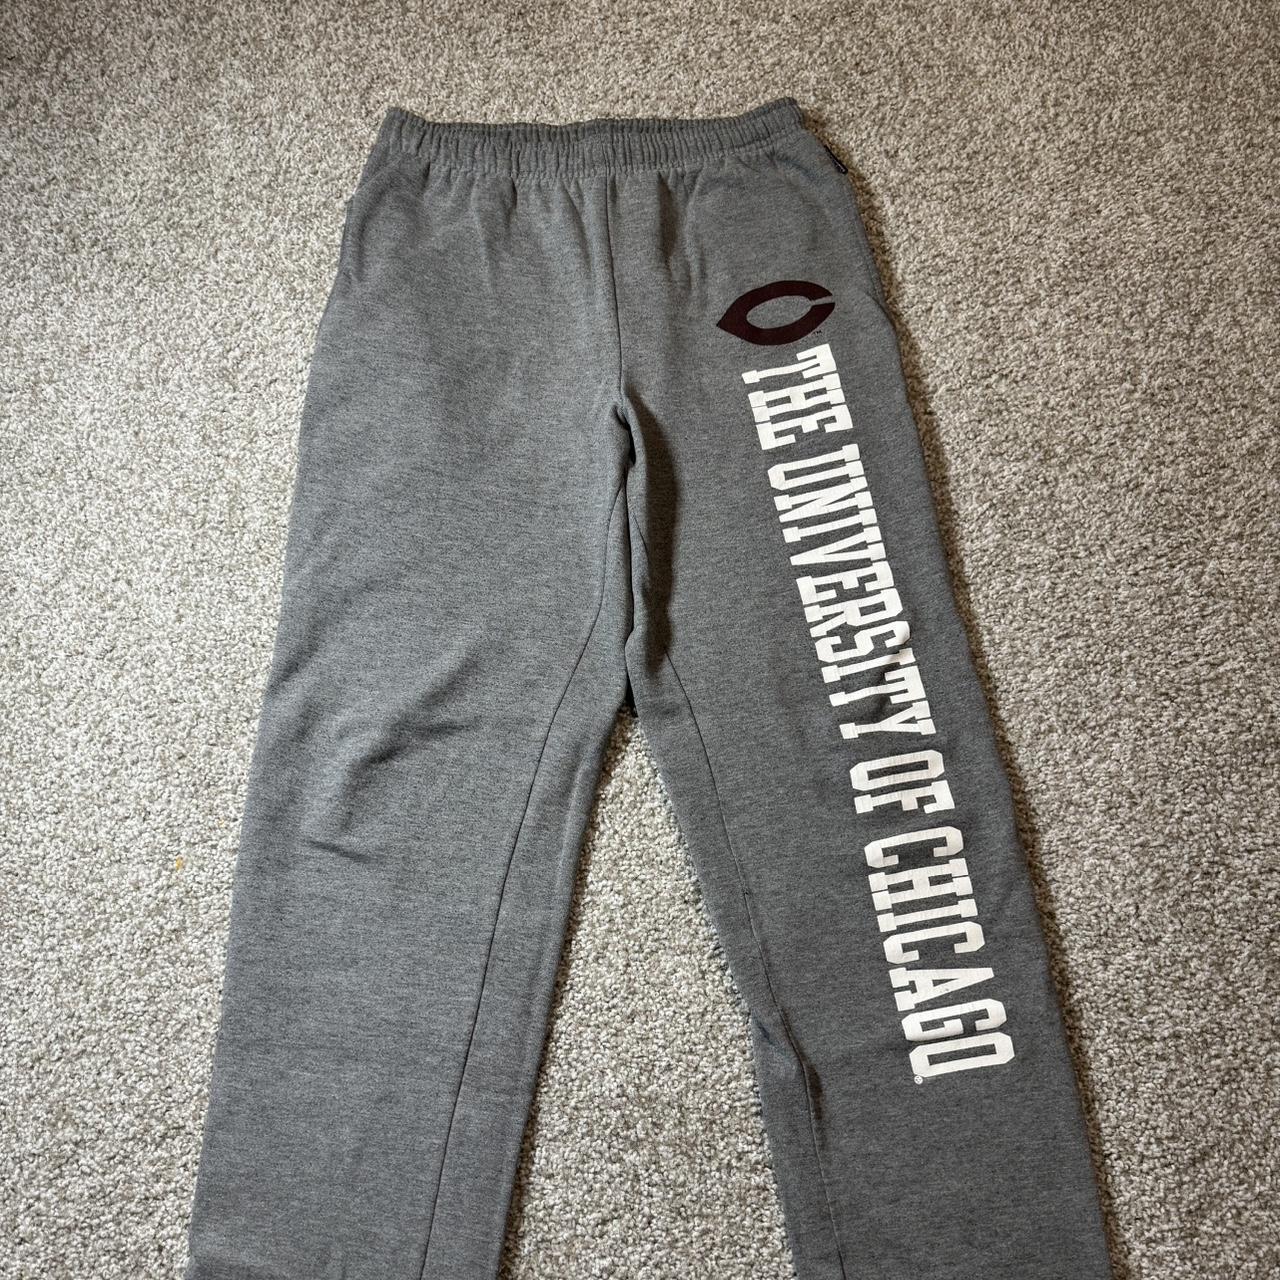 University Of Chicago Sweatpants Size small no flaws - Depop